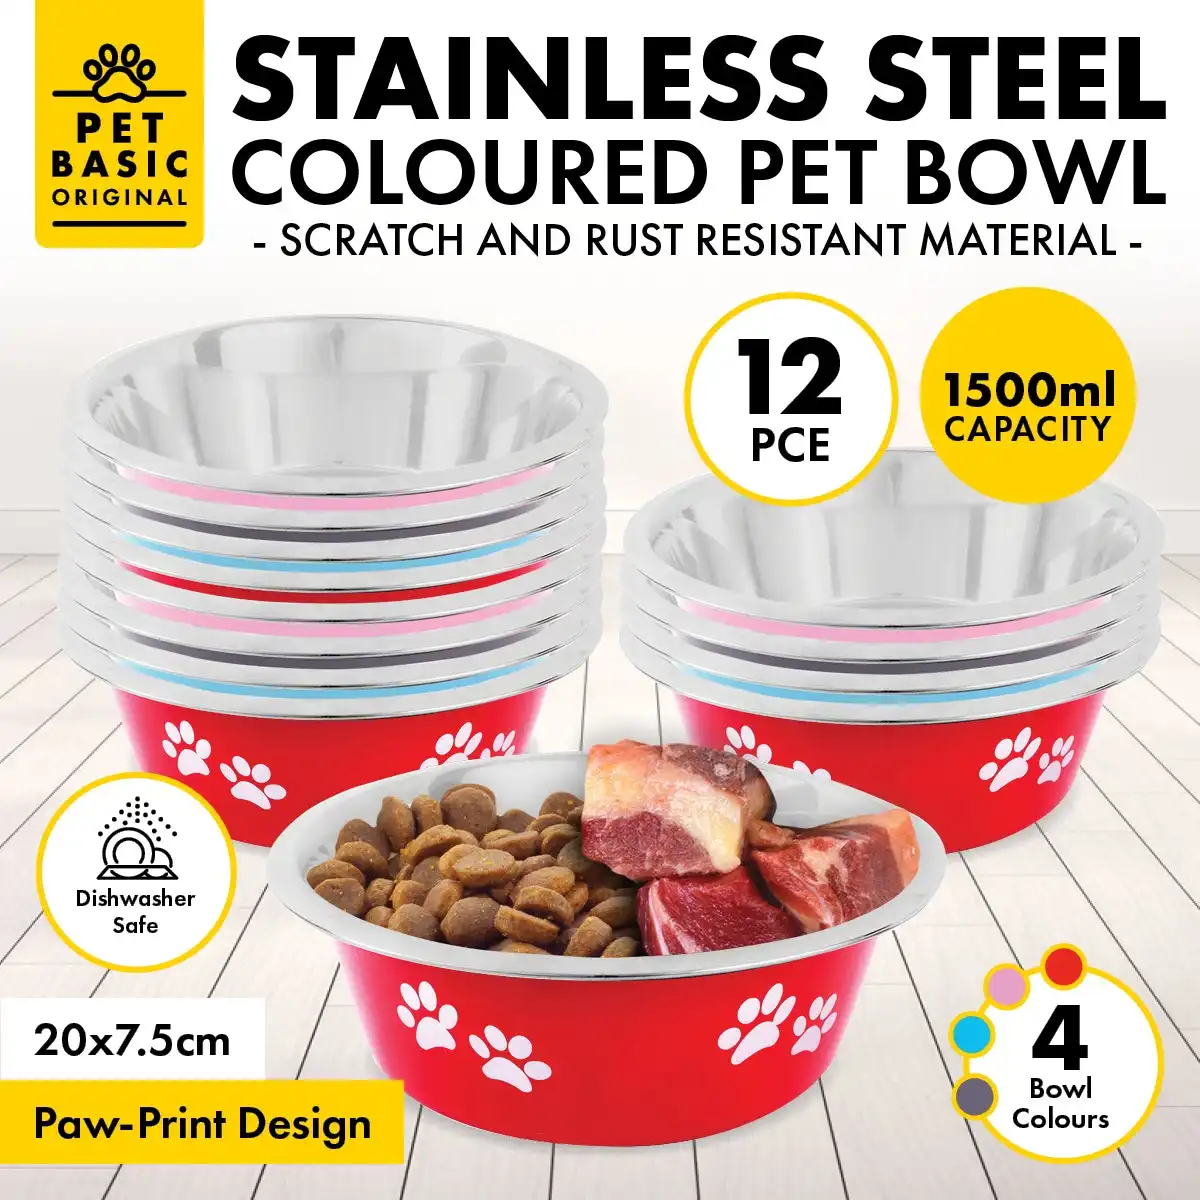 Pet Basic® 12PCE Pet Bowl 20cm Stainless Steel Coloured With Paw Prints 1500ml